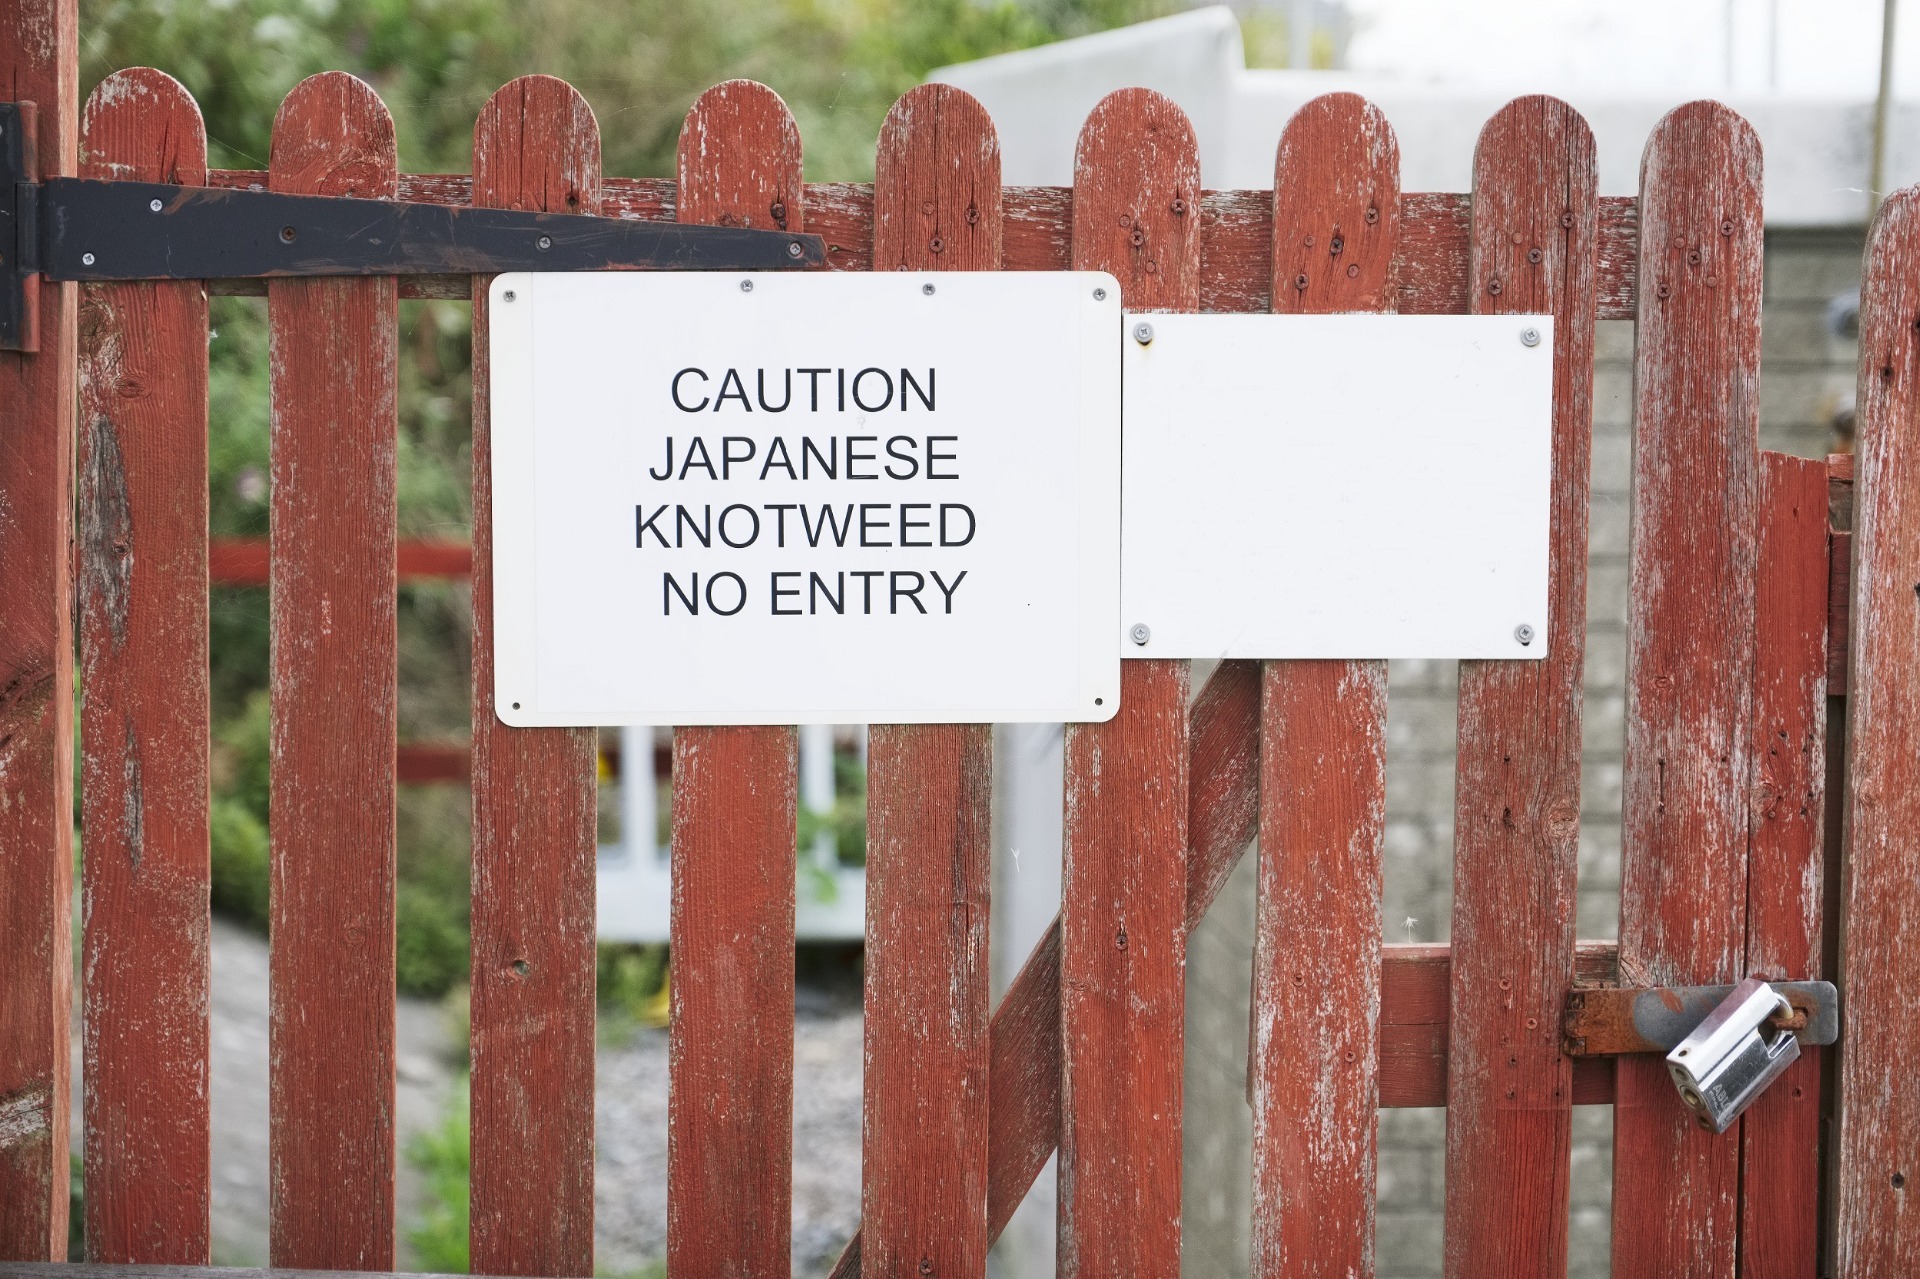 Wooden Gate with a sign stating 'Caution Japanese Knotweed' No Entry